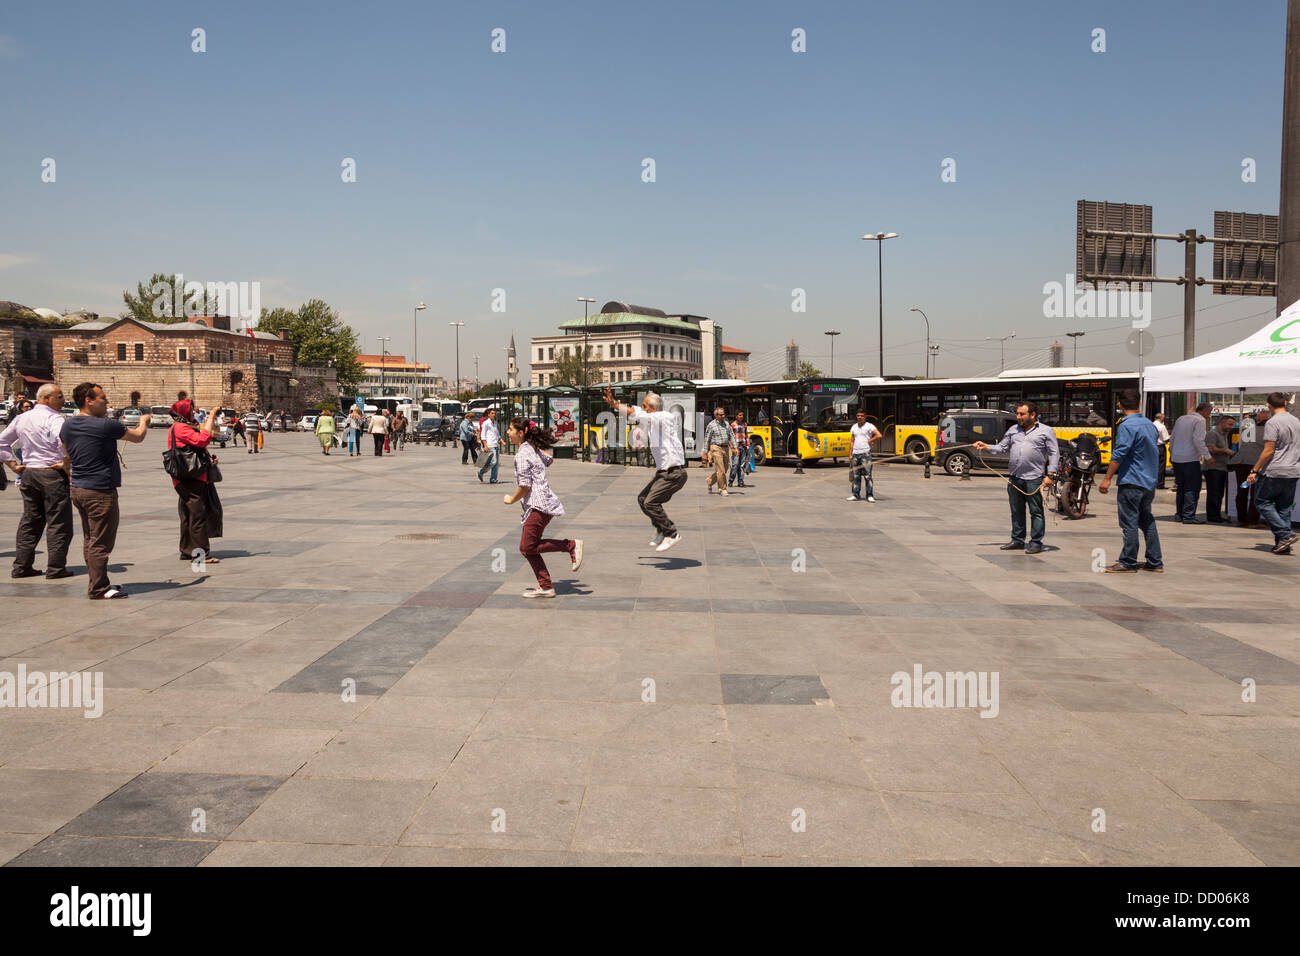 People skipping in a square at Eminonu, Istanbul, Turkey Stock Photo